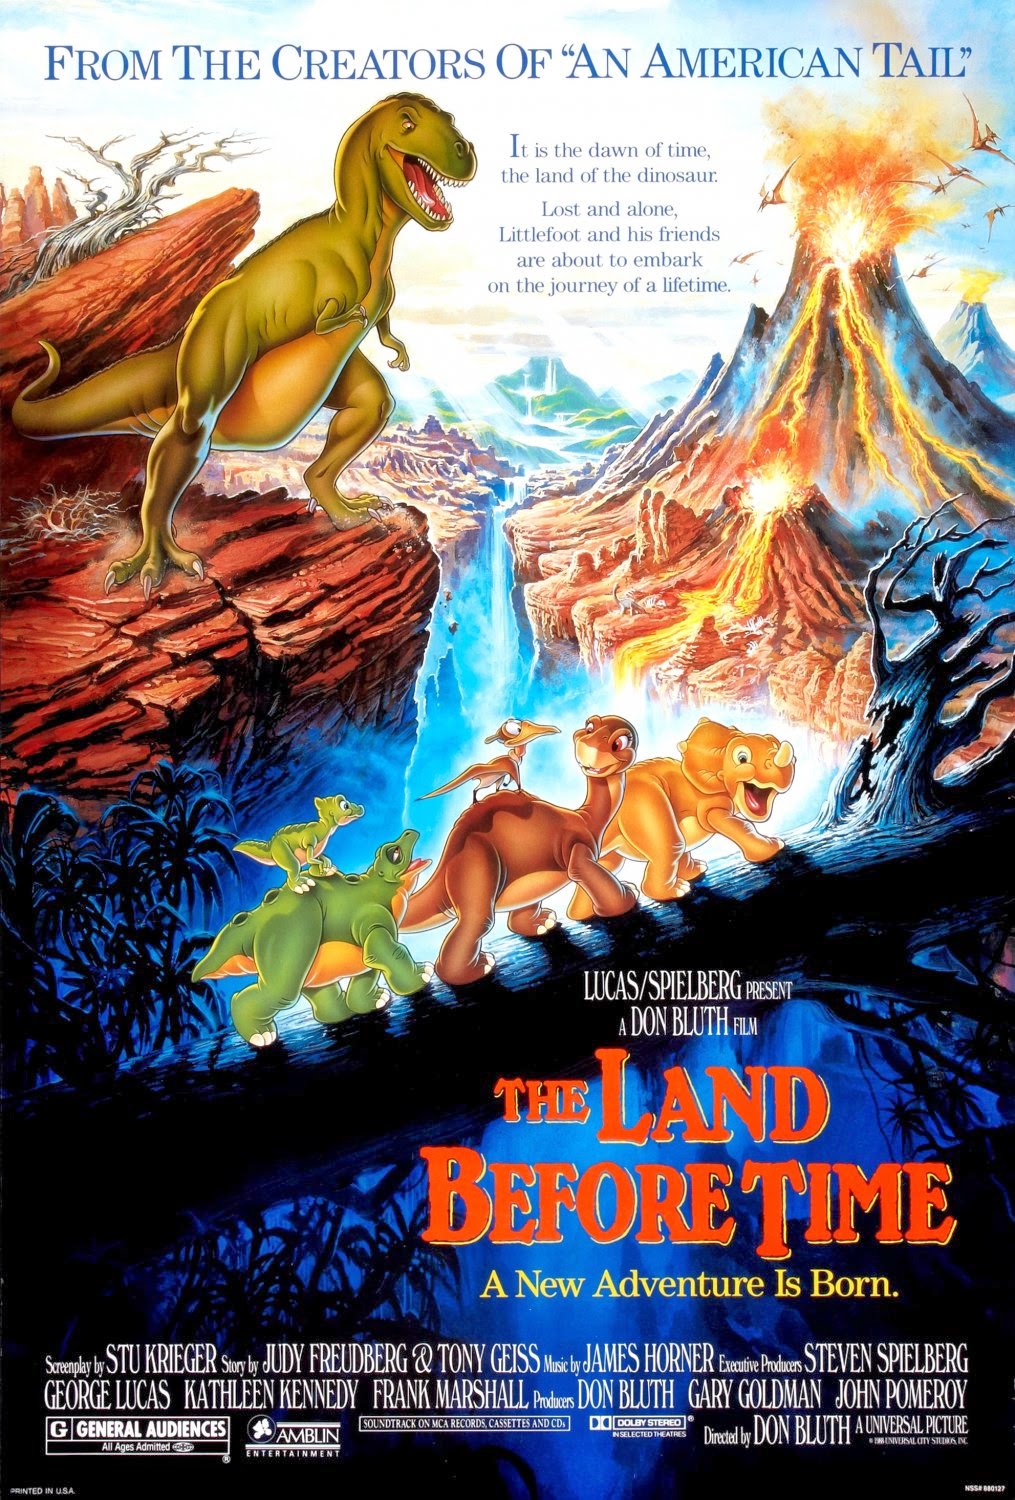 Naptown Nerd The Land Before Time Retrospective Part 1 The Land